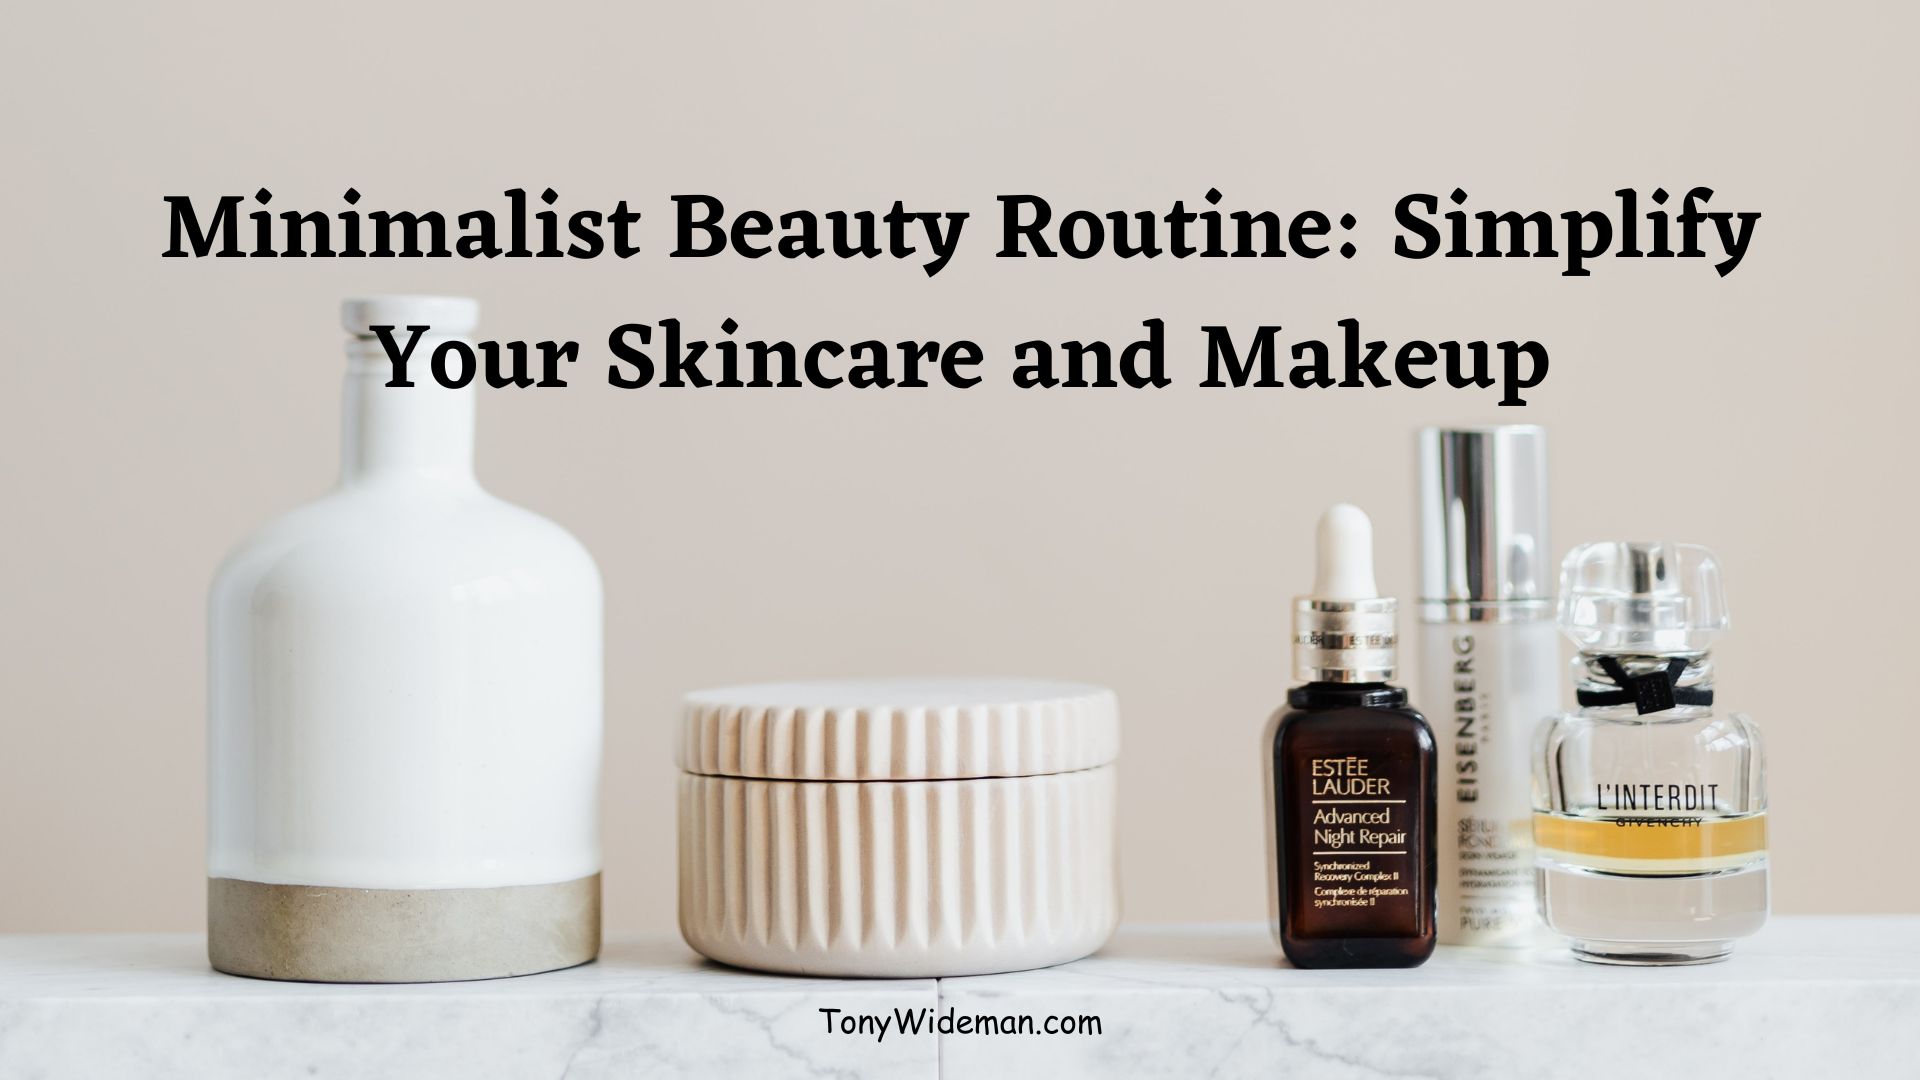 Minimalist Beauty Routine: Simplify Your Skincare and Makeup